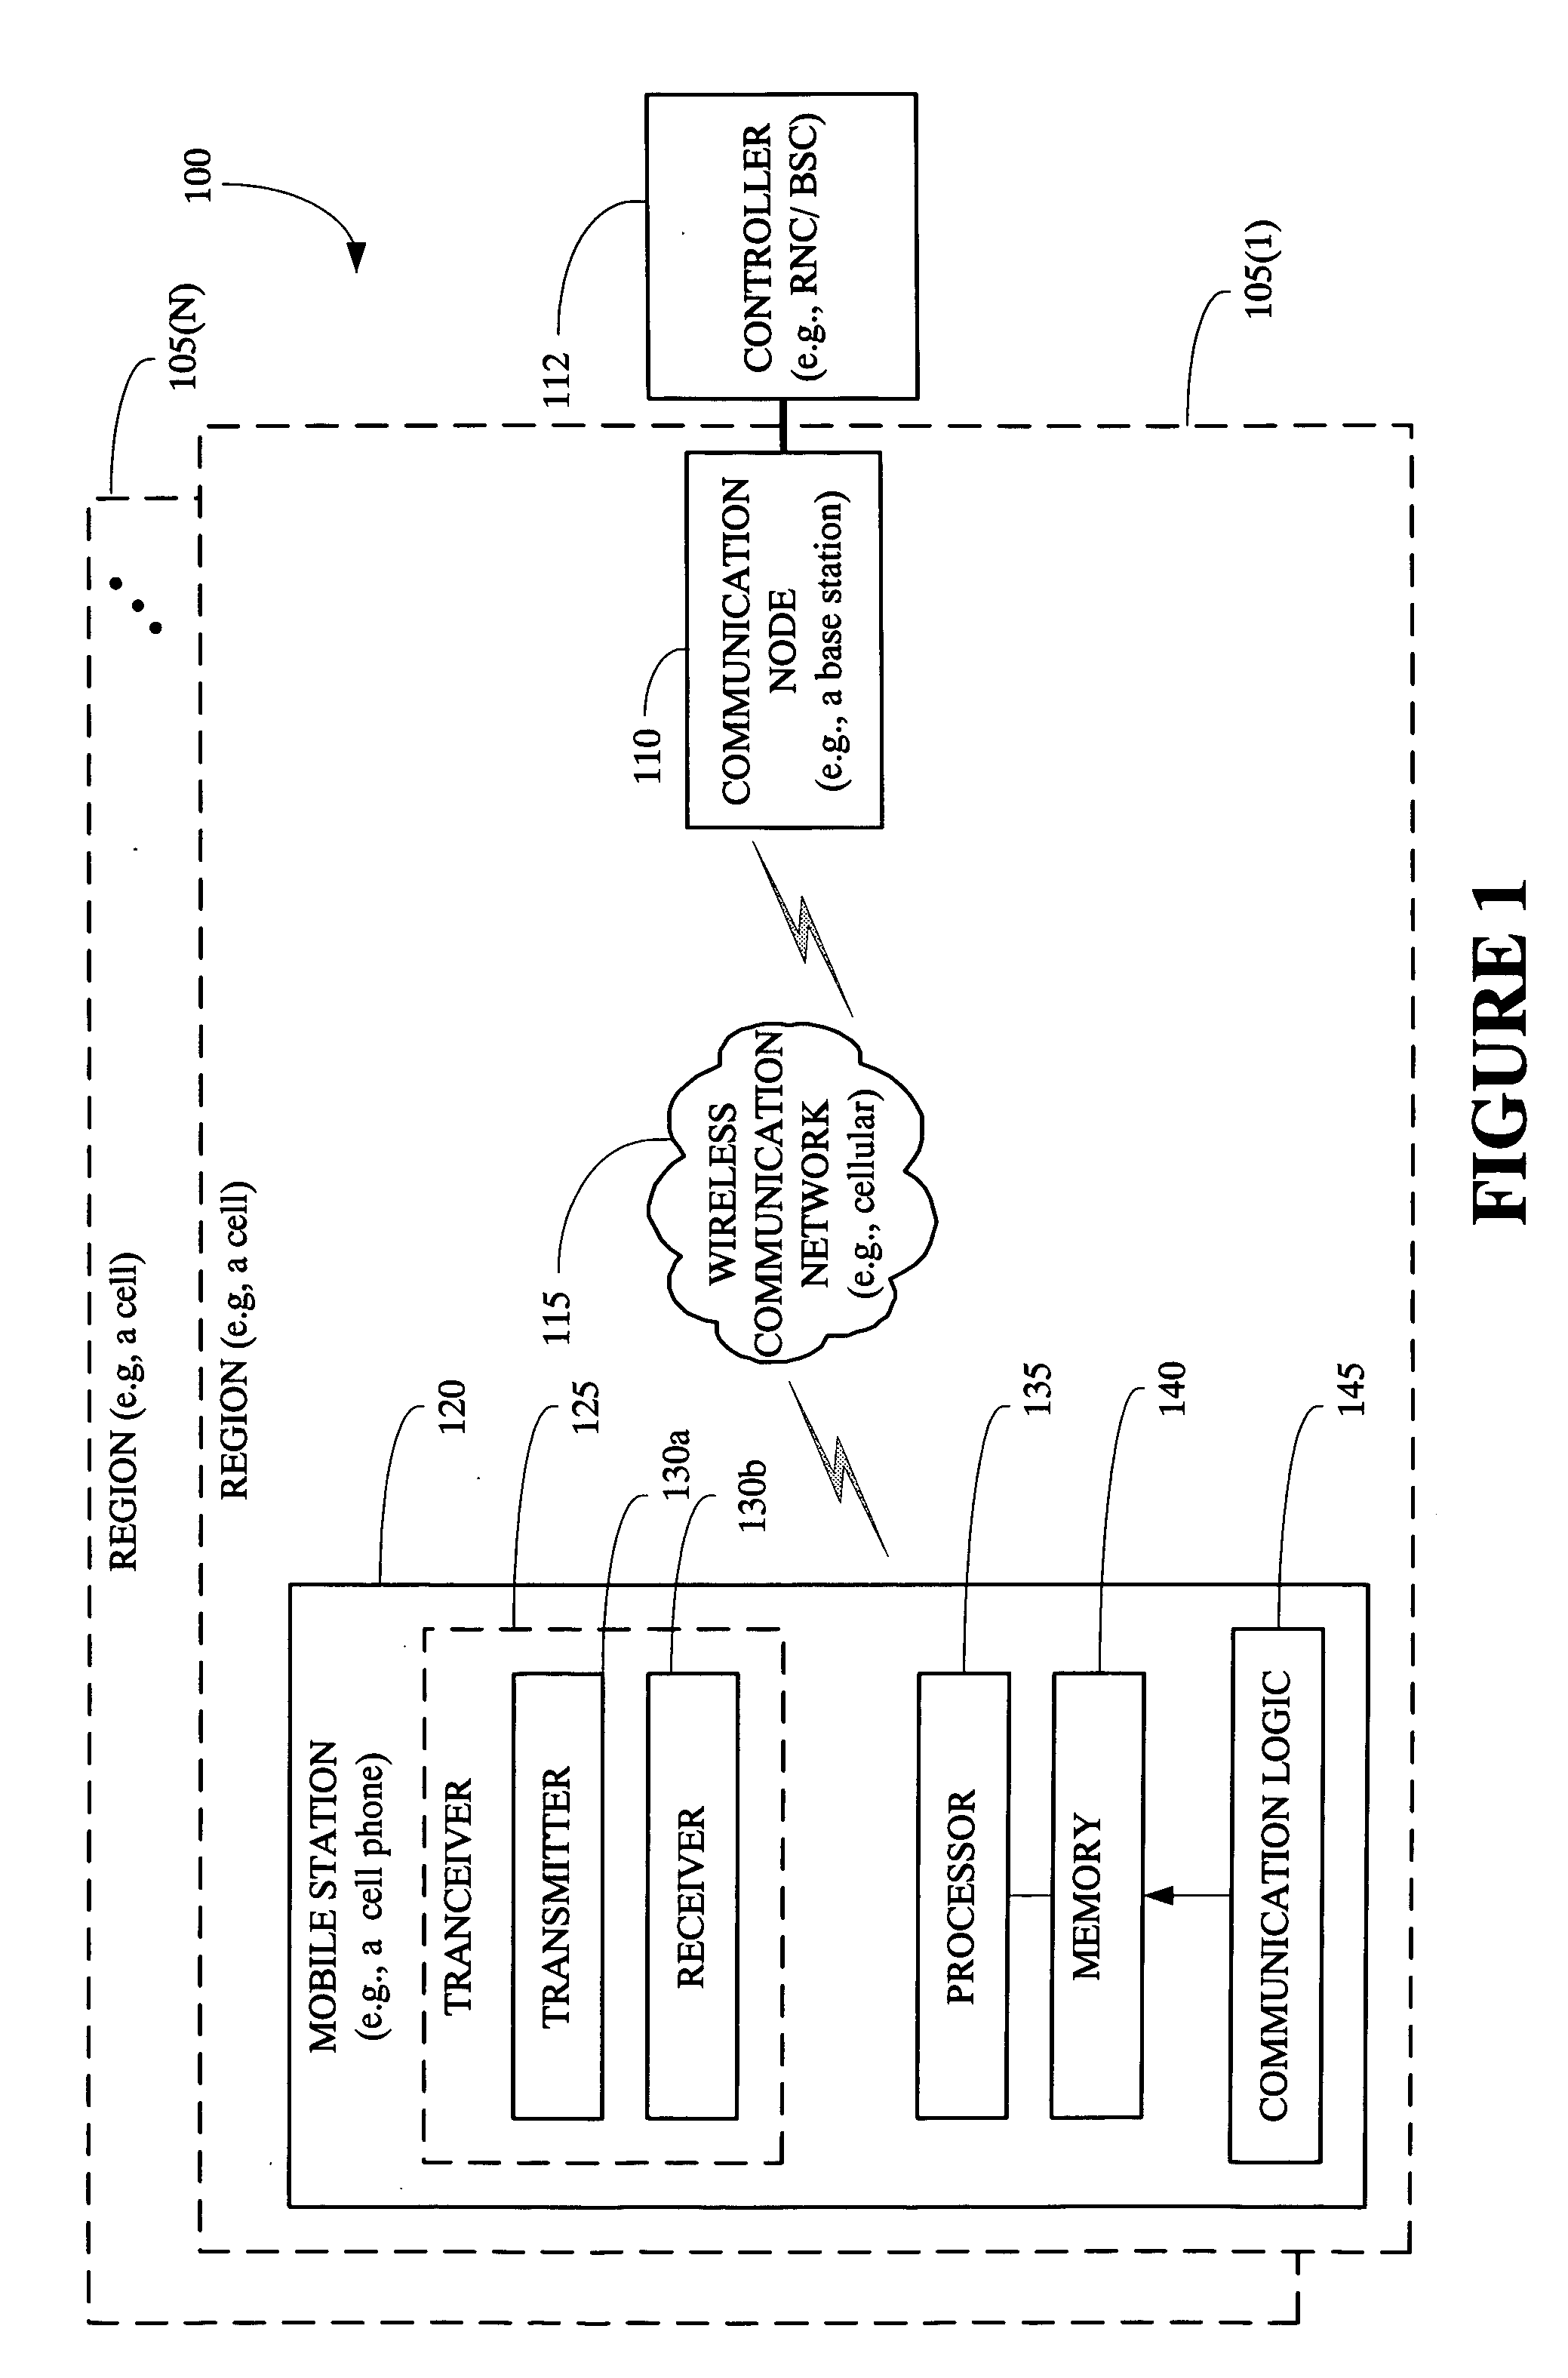 Channel assignment based on service type and wireless communication environment